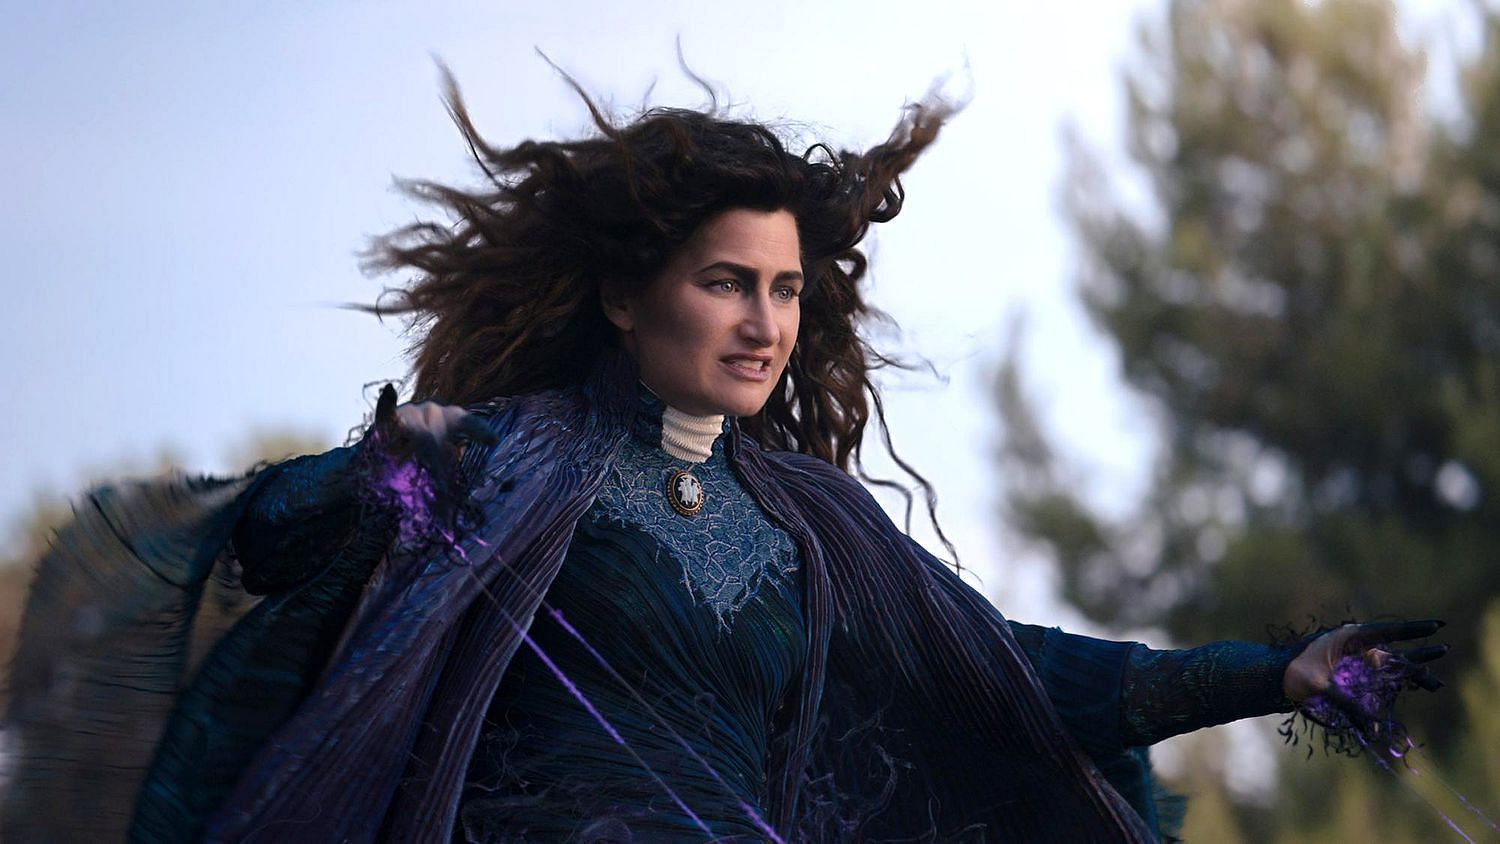 Kathryn Hahn is set to mesmerize fans once again in the extended Disney+ series Agatha: Coven of Chaos (Image via Marvel Studios)